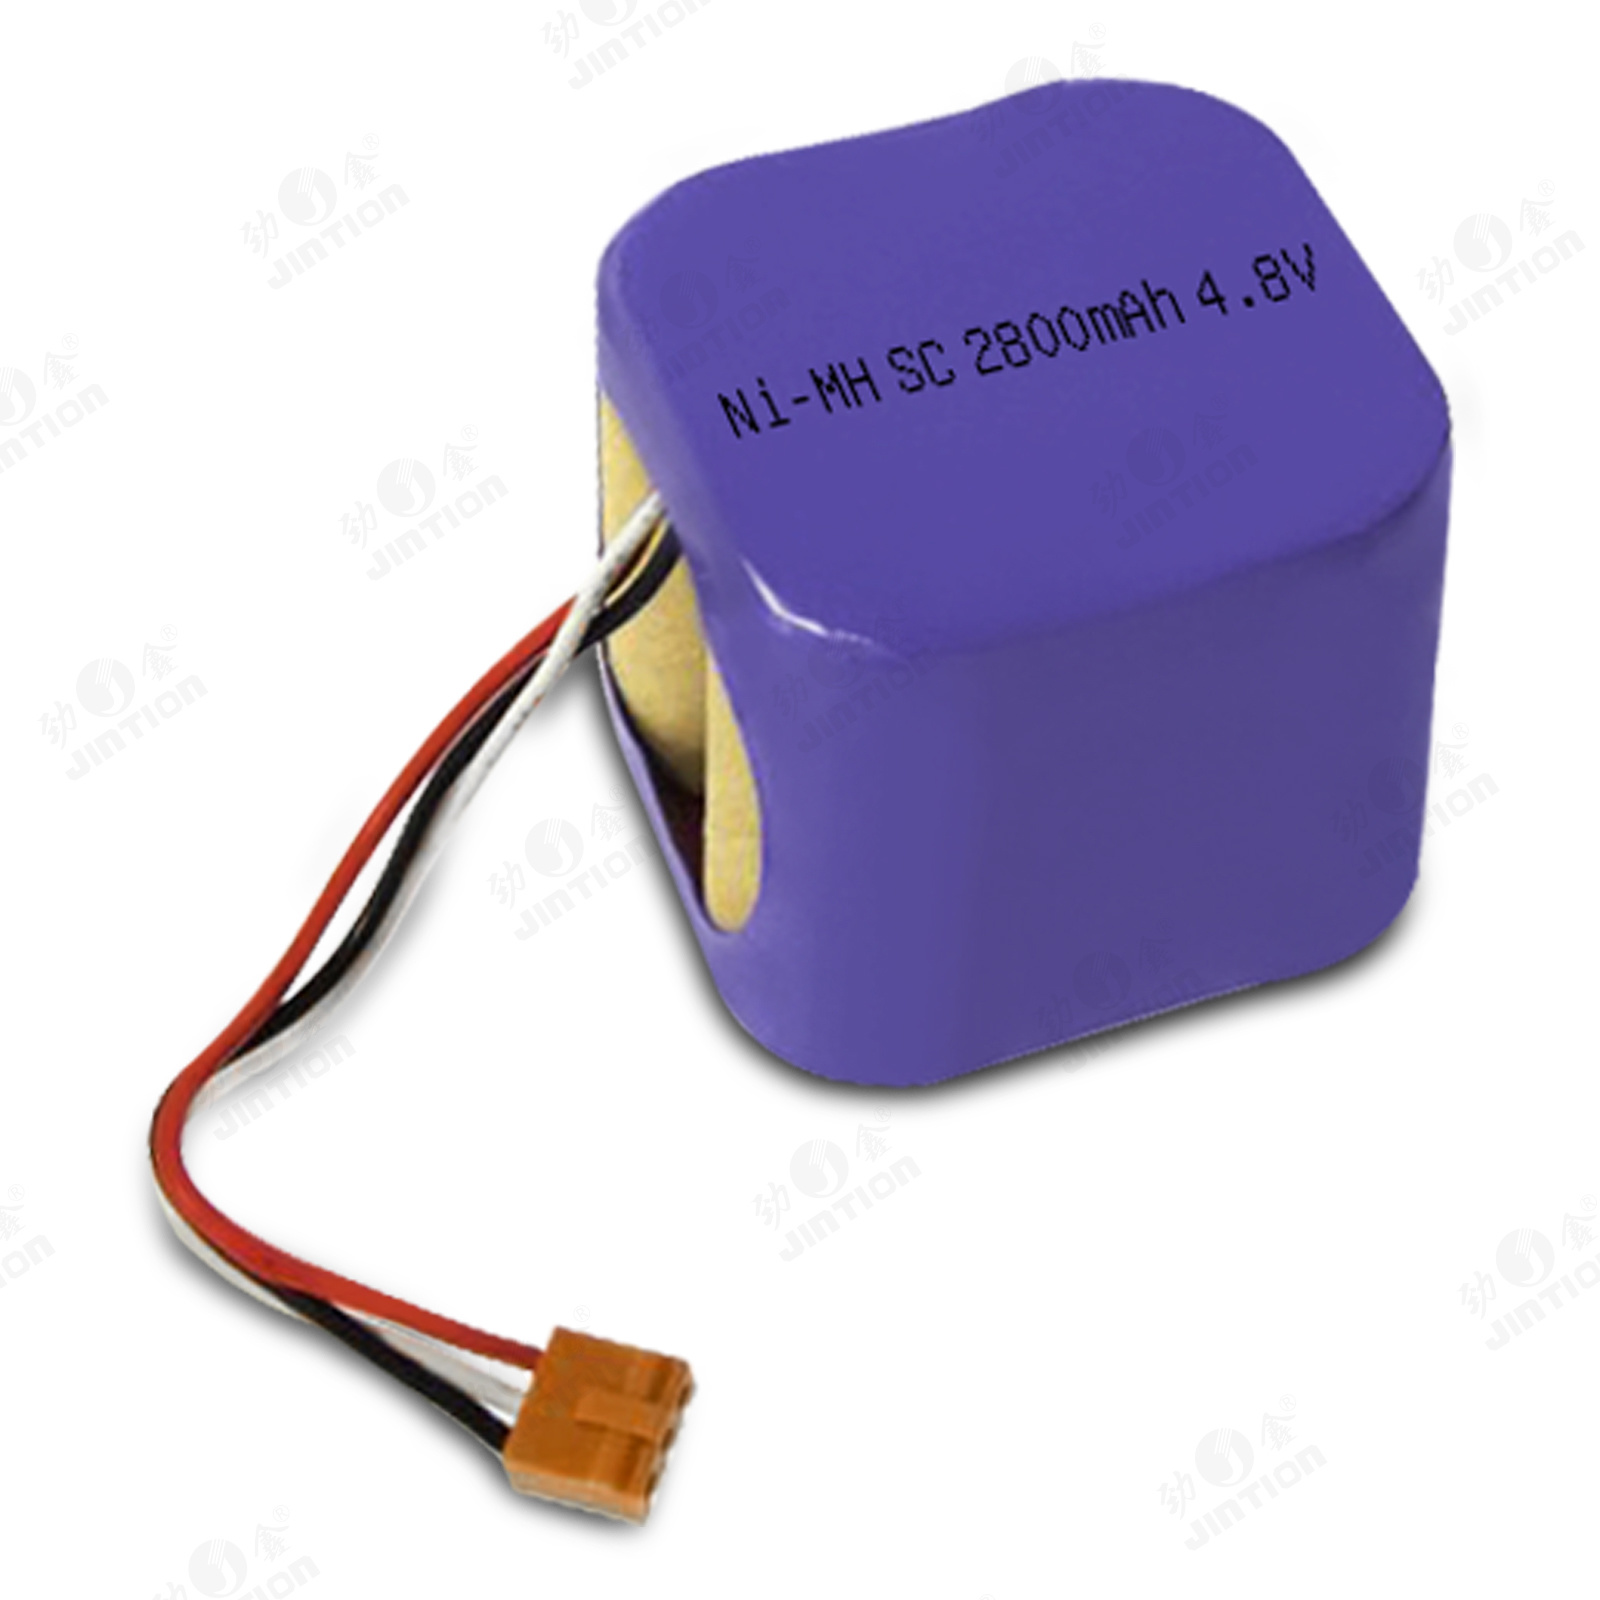 JINTION NIMH SC 2800MAH 4.8V nimh rechargeable battery for JMS infusion pumps OT-800 series